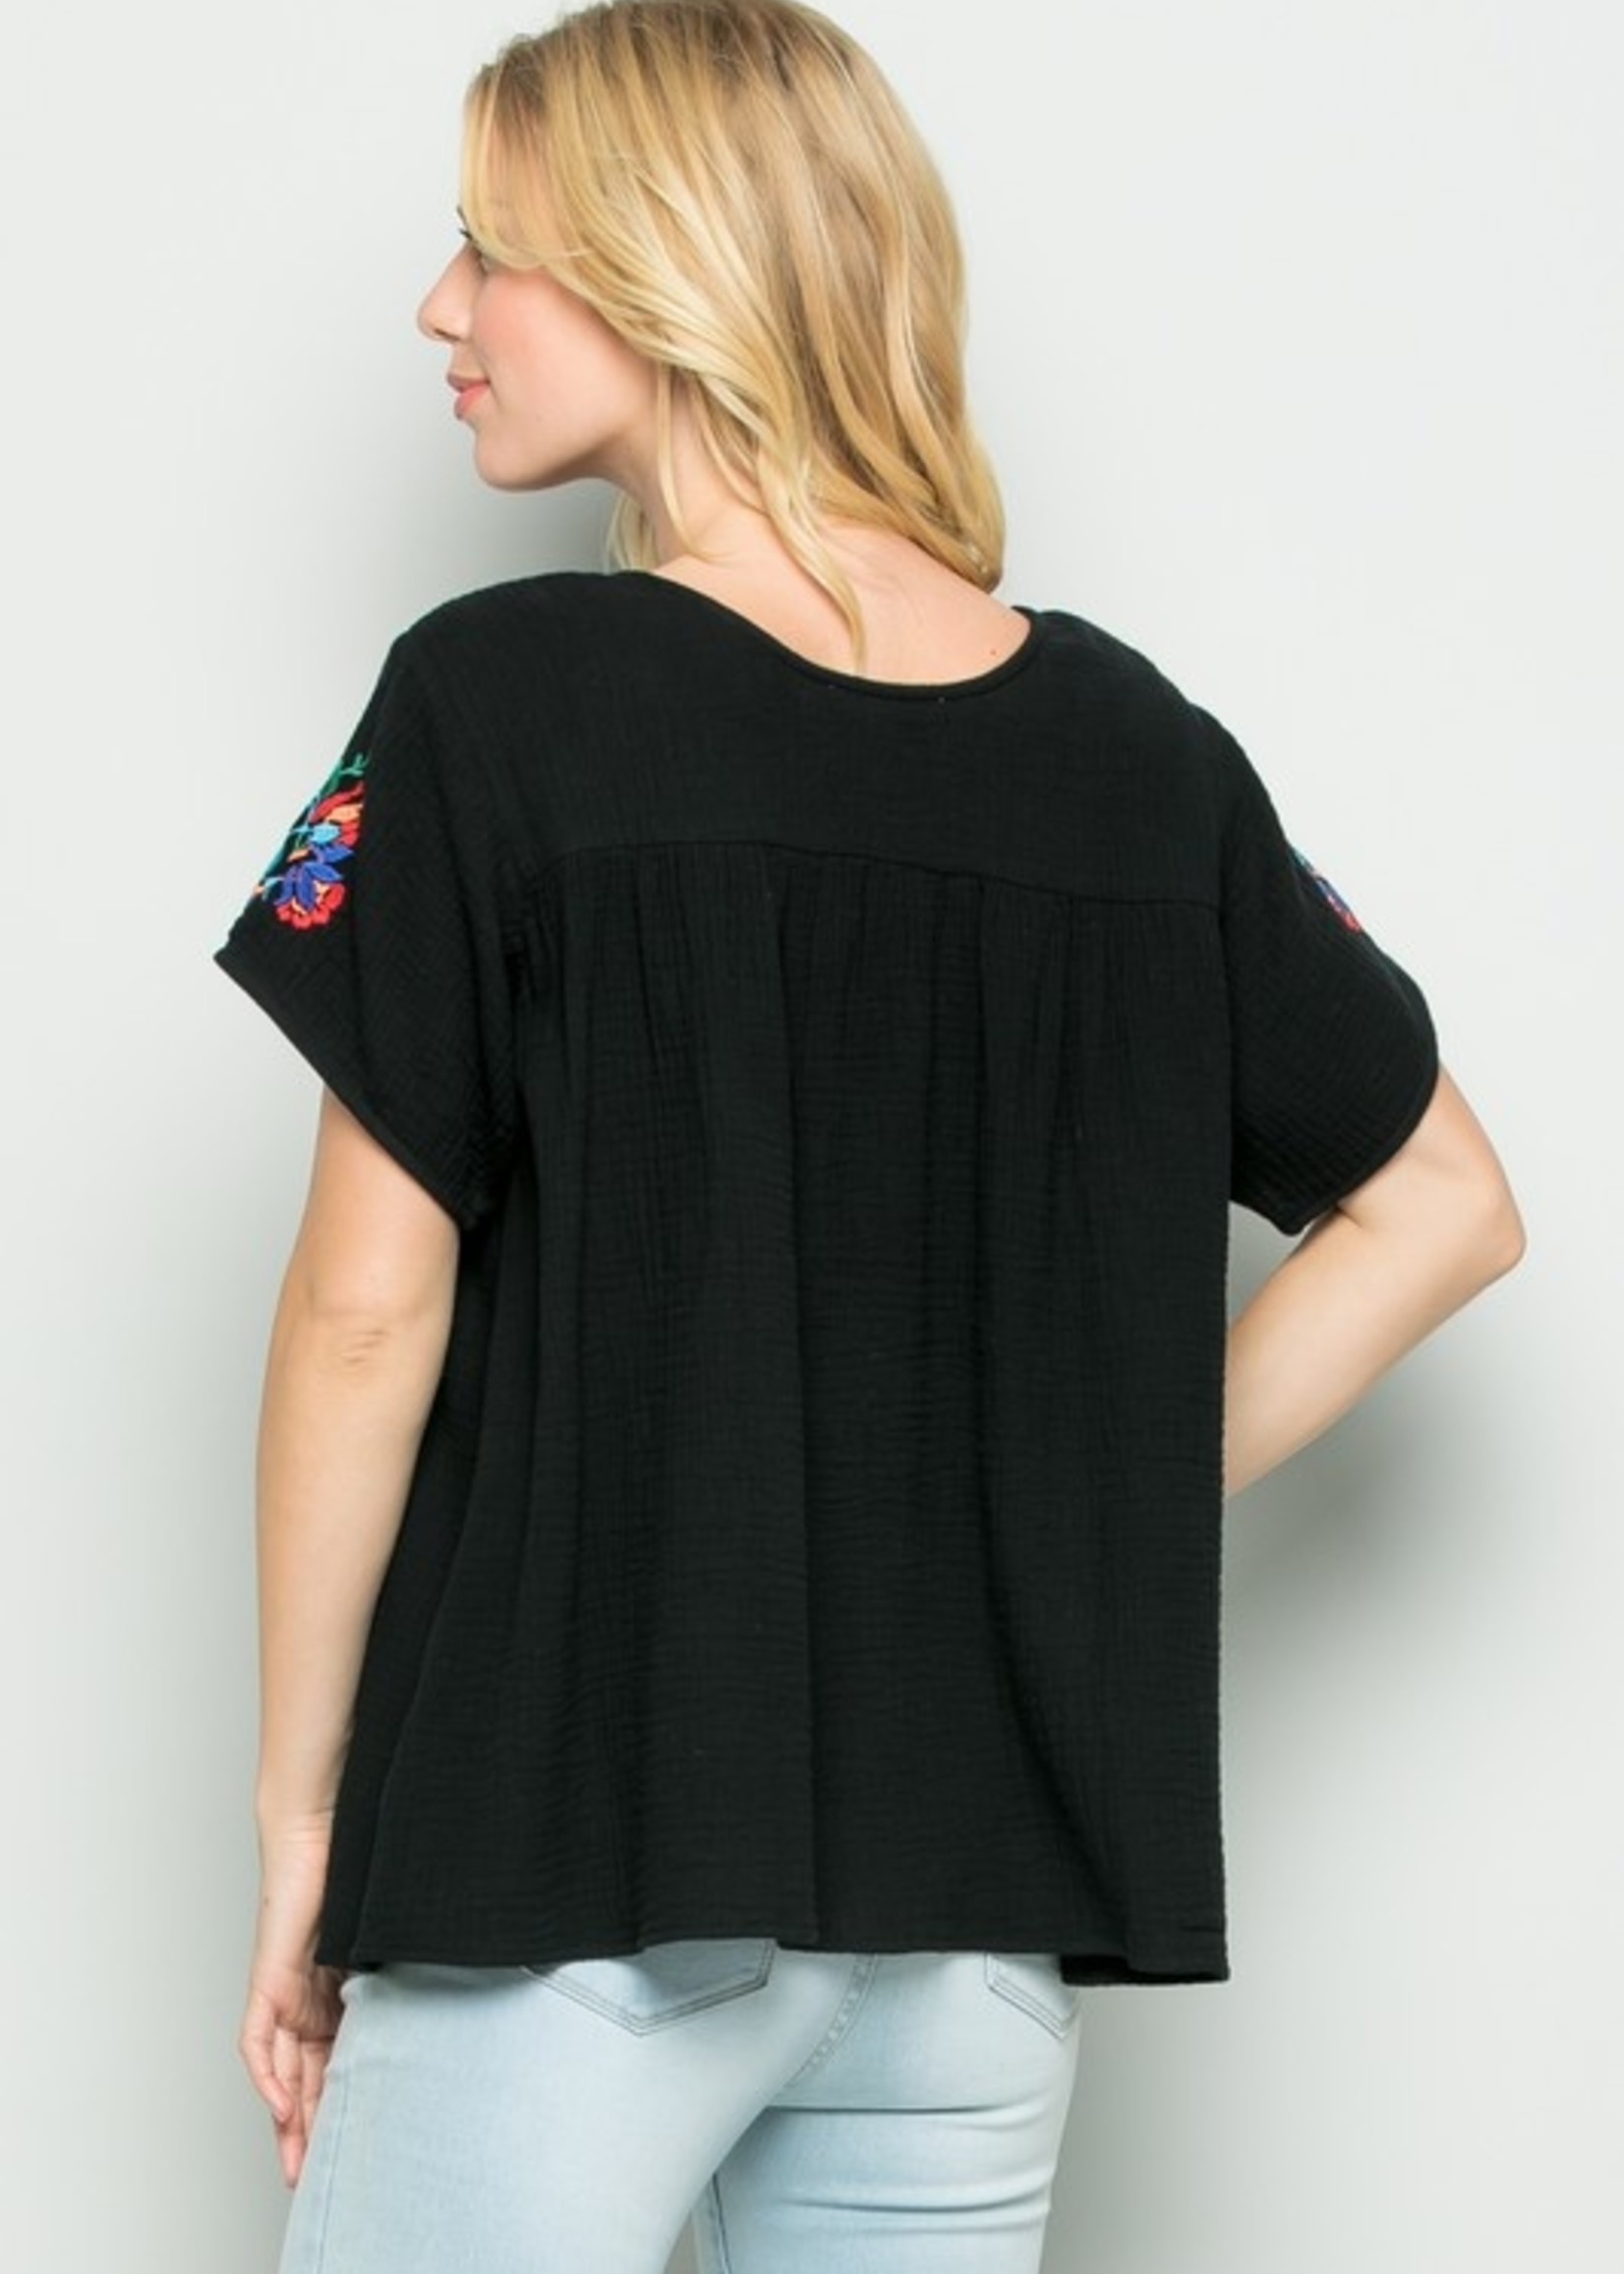 Floral Embroidery Top - Black